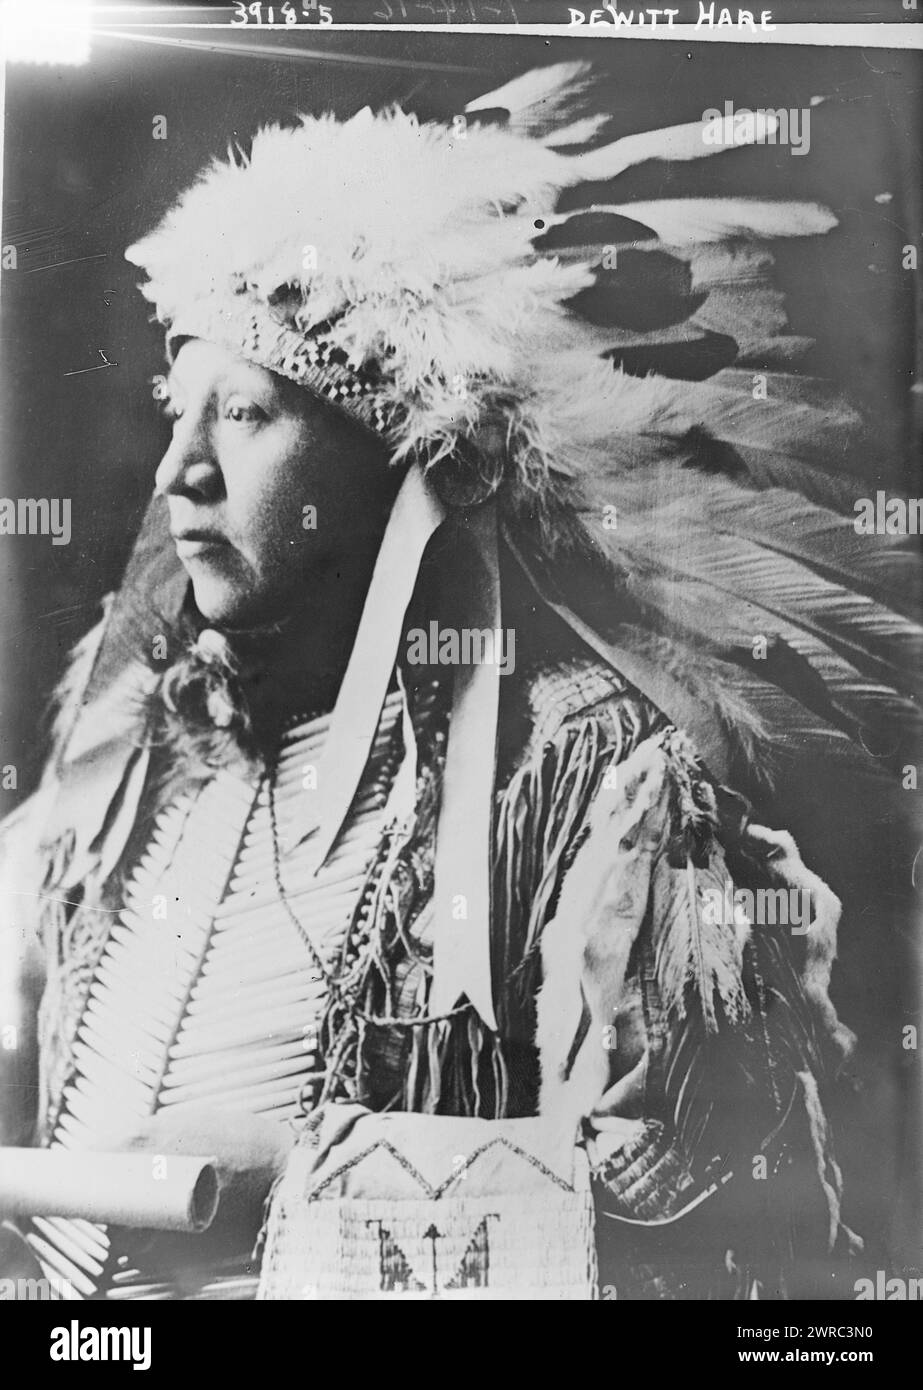 Dewitt Hare In American Indian headdress, between ca. 1915 and ca. 1920, Glass negatives, 1 negative: glass Stock Photo